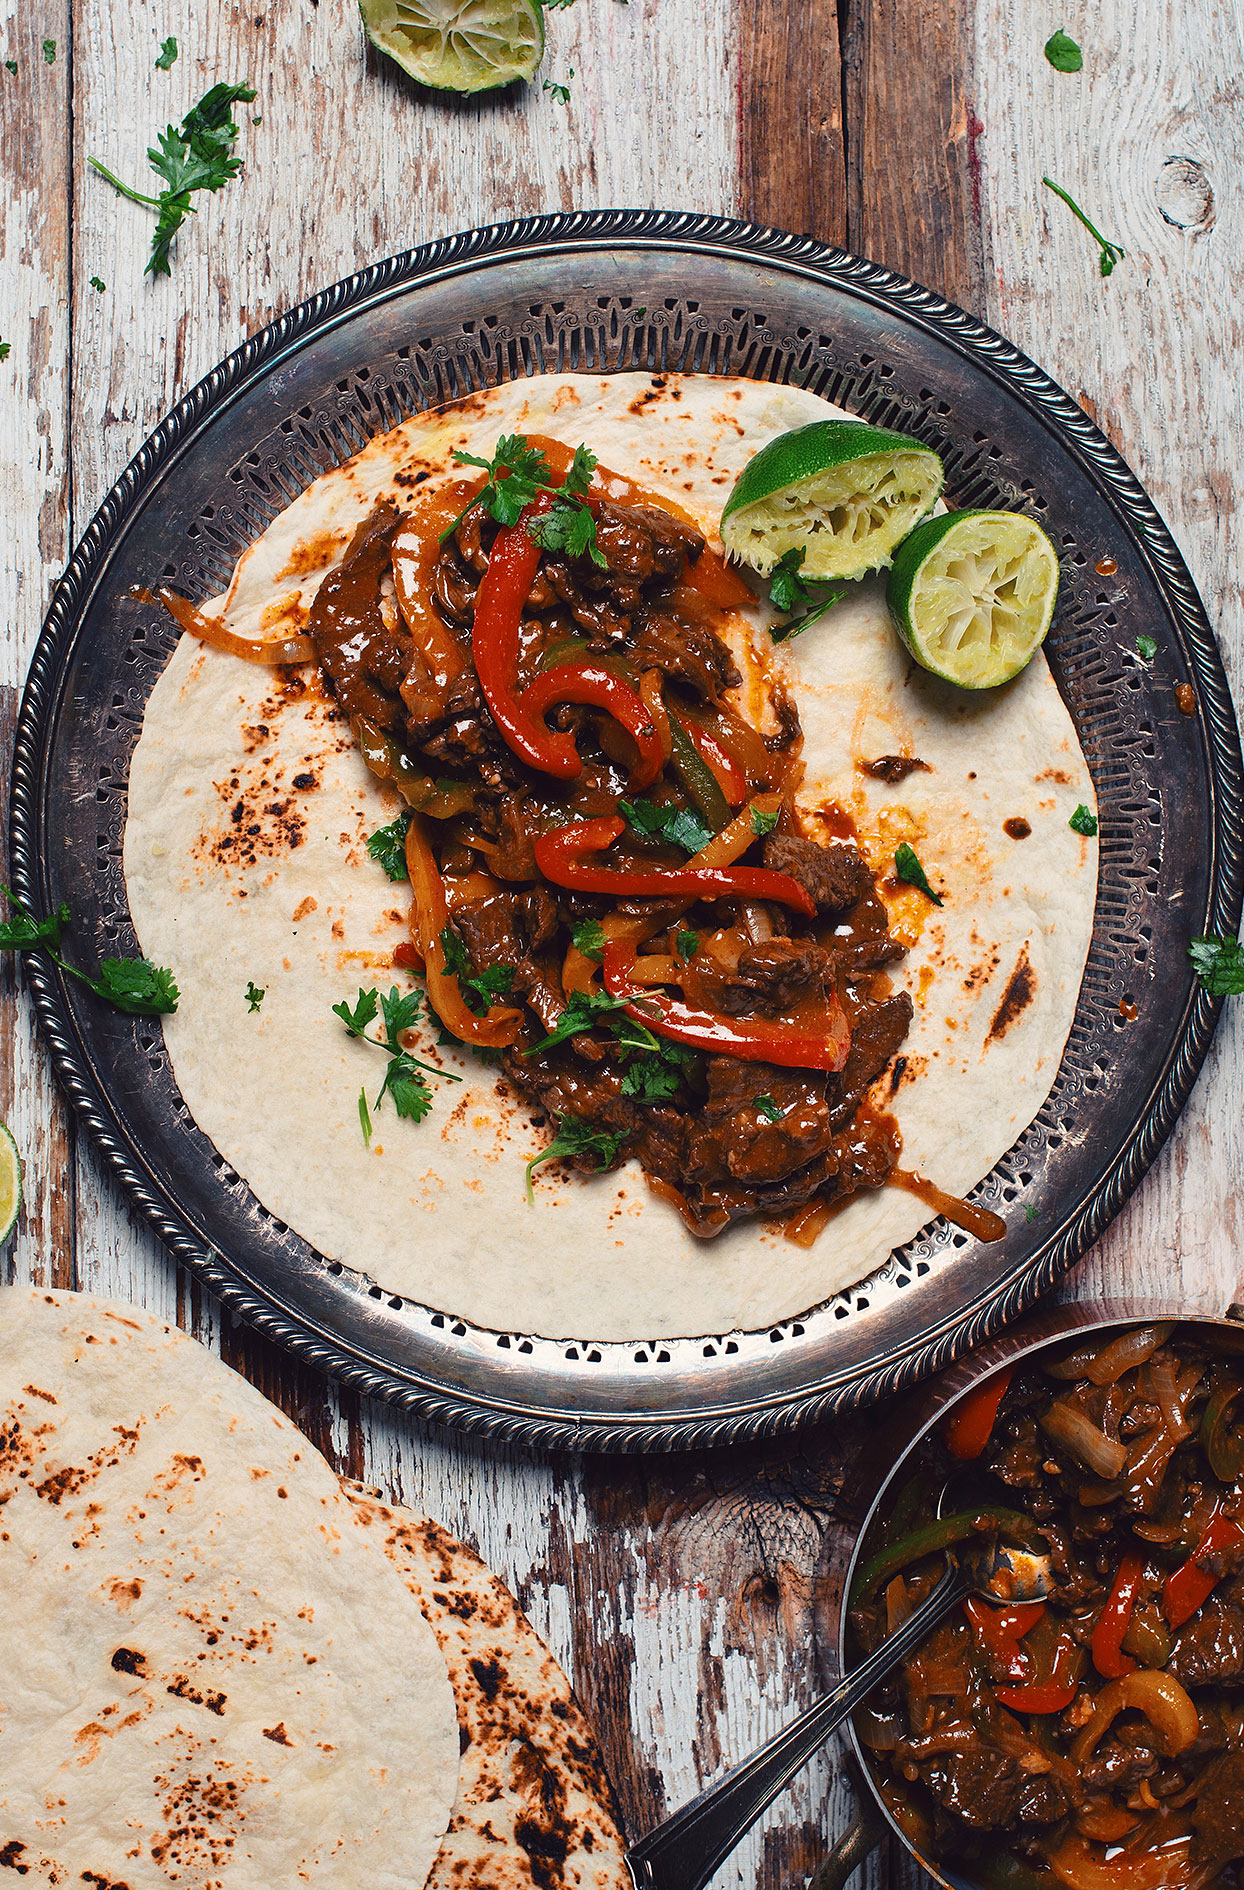 Beef fajitas with lime and beer marinade